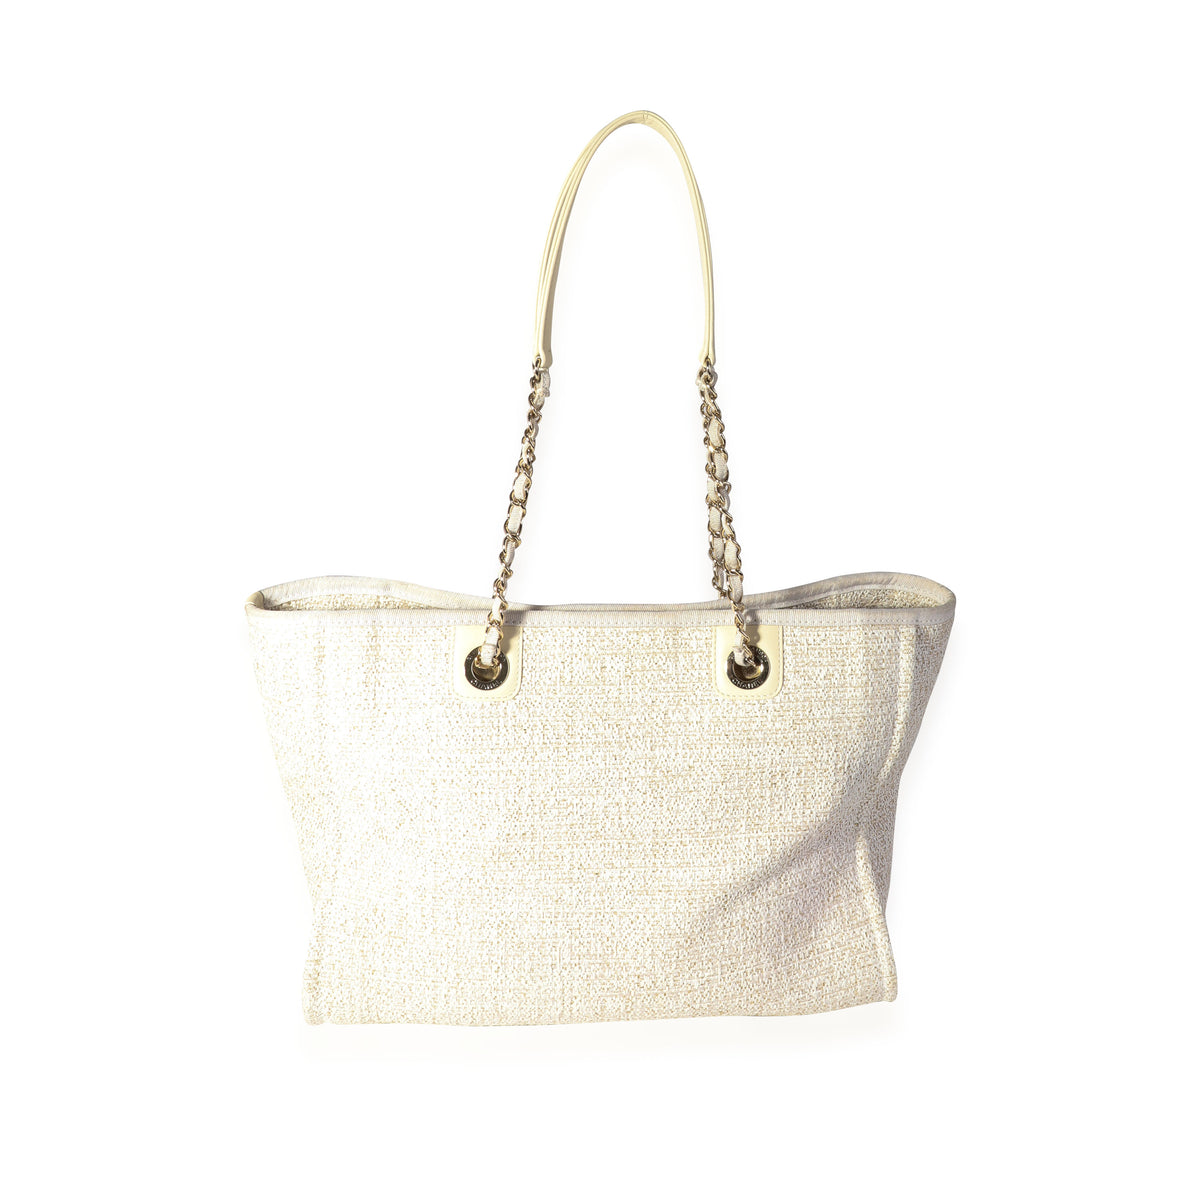 Chanel Ivory Metallic Tweed Small Deauville Tote